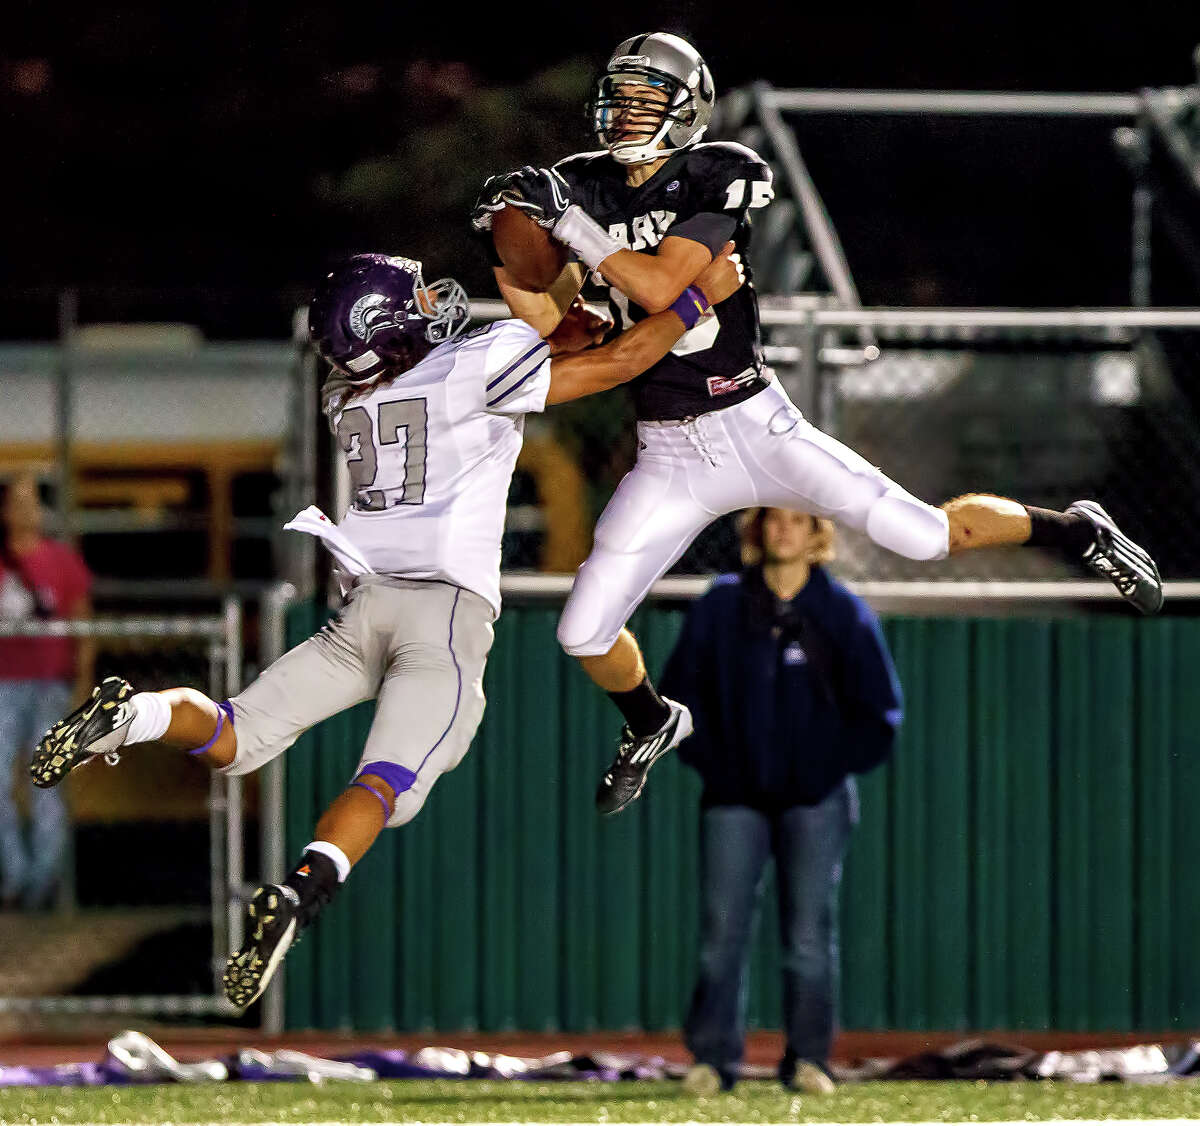 Clark's Presley Miller (right) leaps in the end zone for a 14-yard touchdown reception over Warren's Luis Mercer during the third quarter of their game at Farris Stadium on Nov. 9, 2012. Clark claimed a spot in the playoffs with a 27-26 overtime victory over the Warriors. MARVIN PFEIFFER/ mpfeiffer@express-news.net